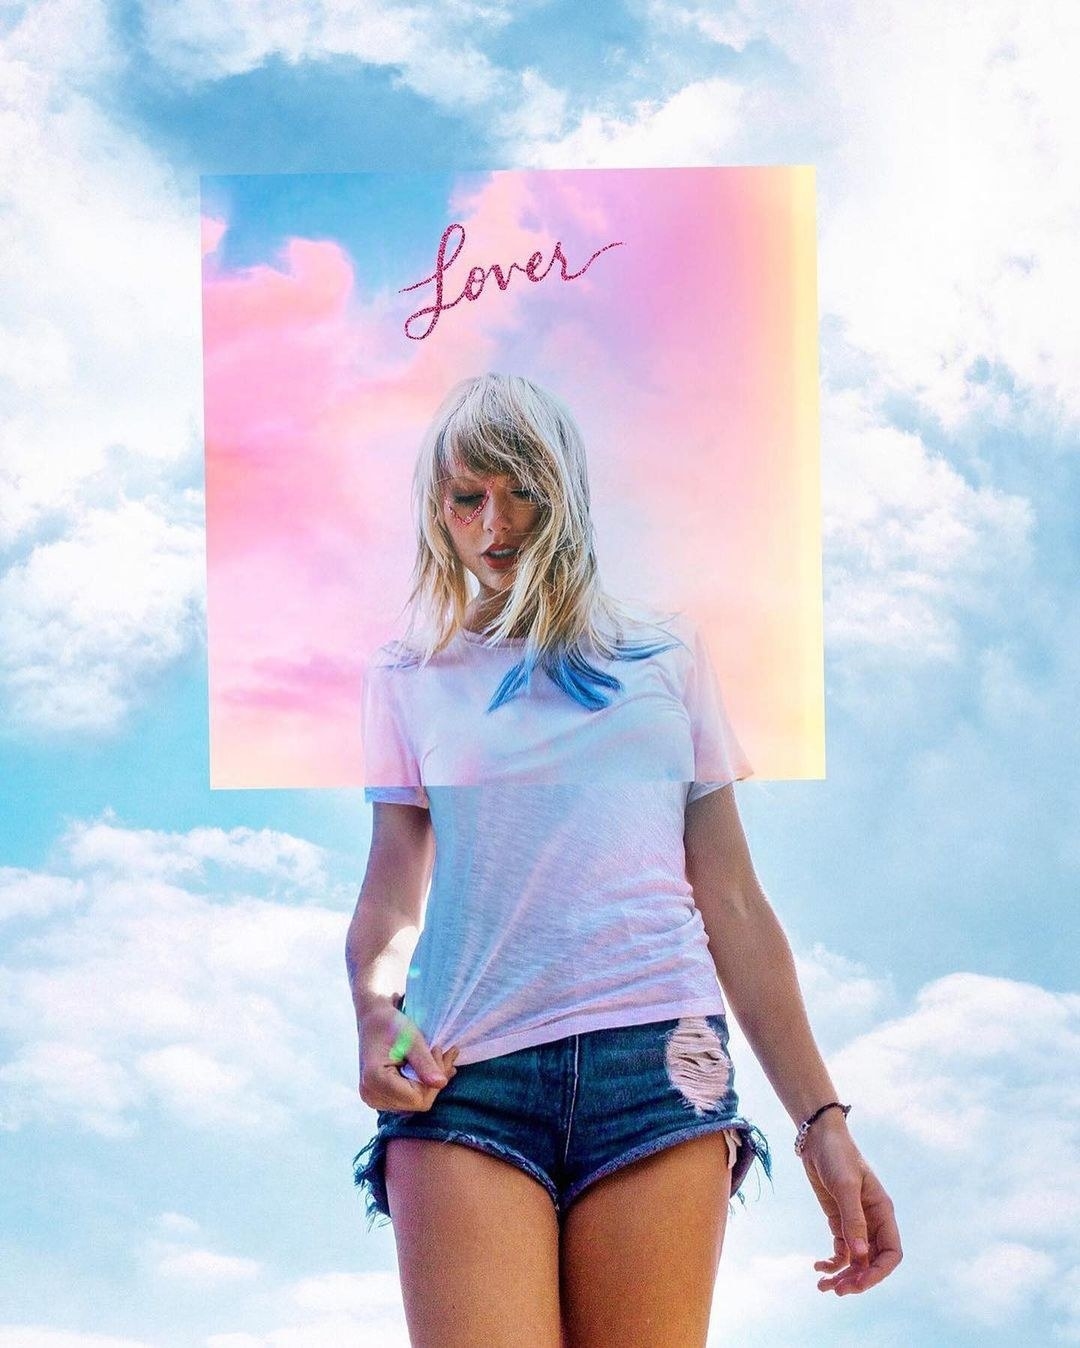 An Artist Recreated Taylor Swift Album Covers